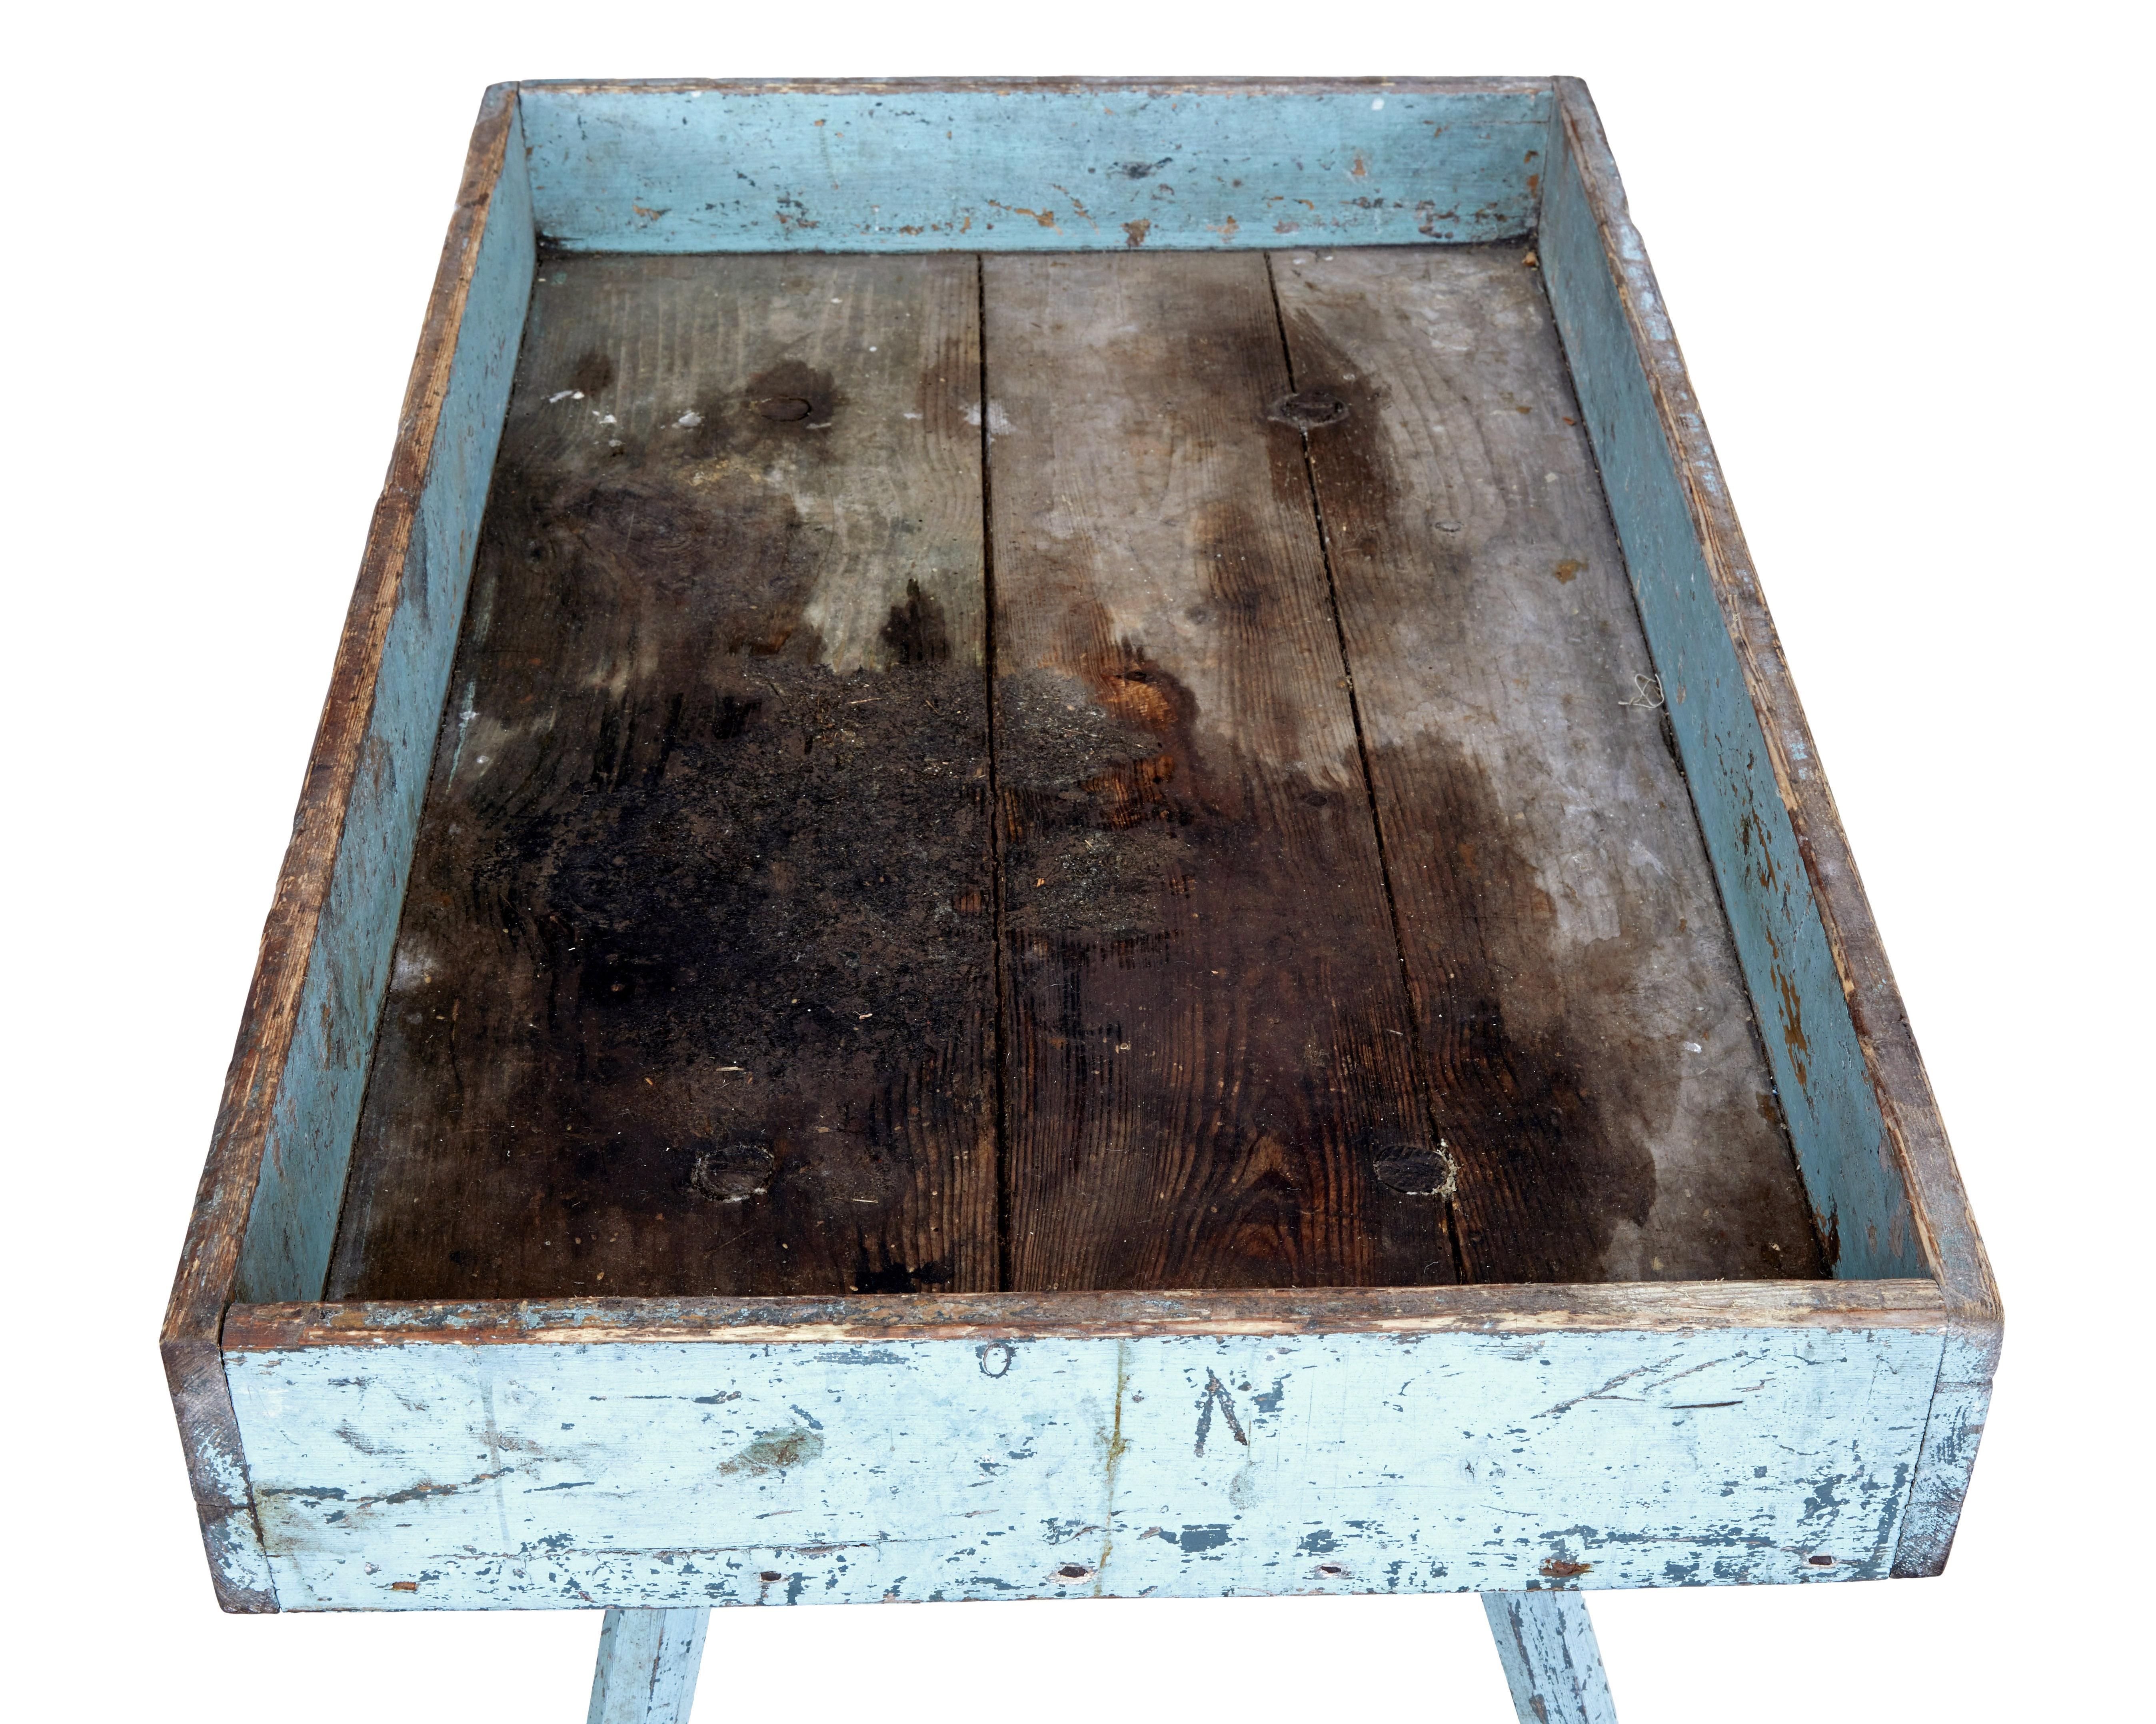 19th century rustic painted pine garden room tray table circa 1880.

Scandinavian rustic table made from pine presented in original condition.  The table surface could be cleaned to use in the home as a side table.

Original paint which is now